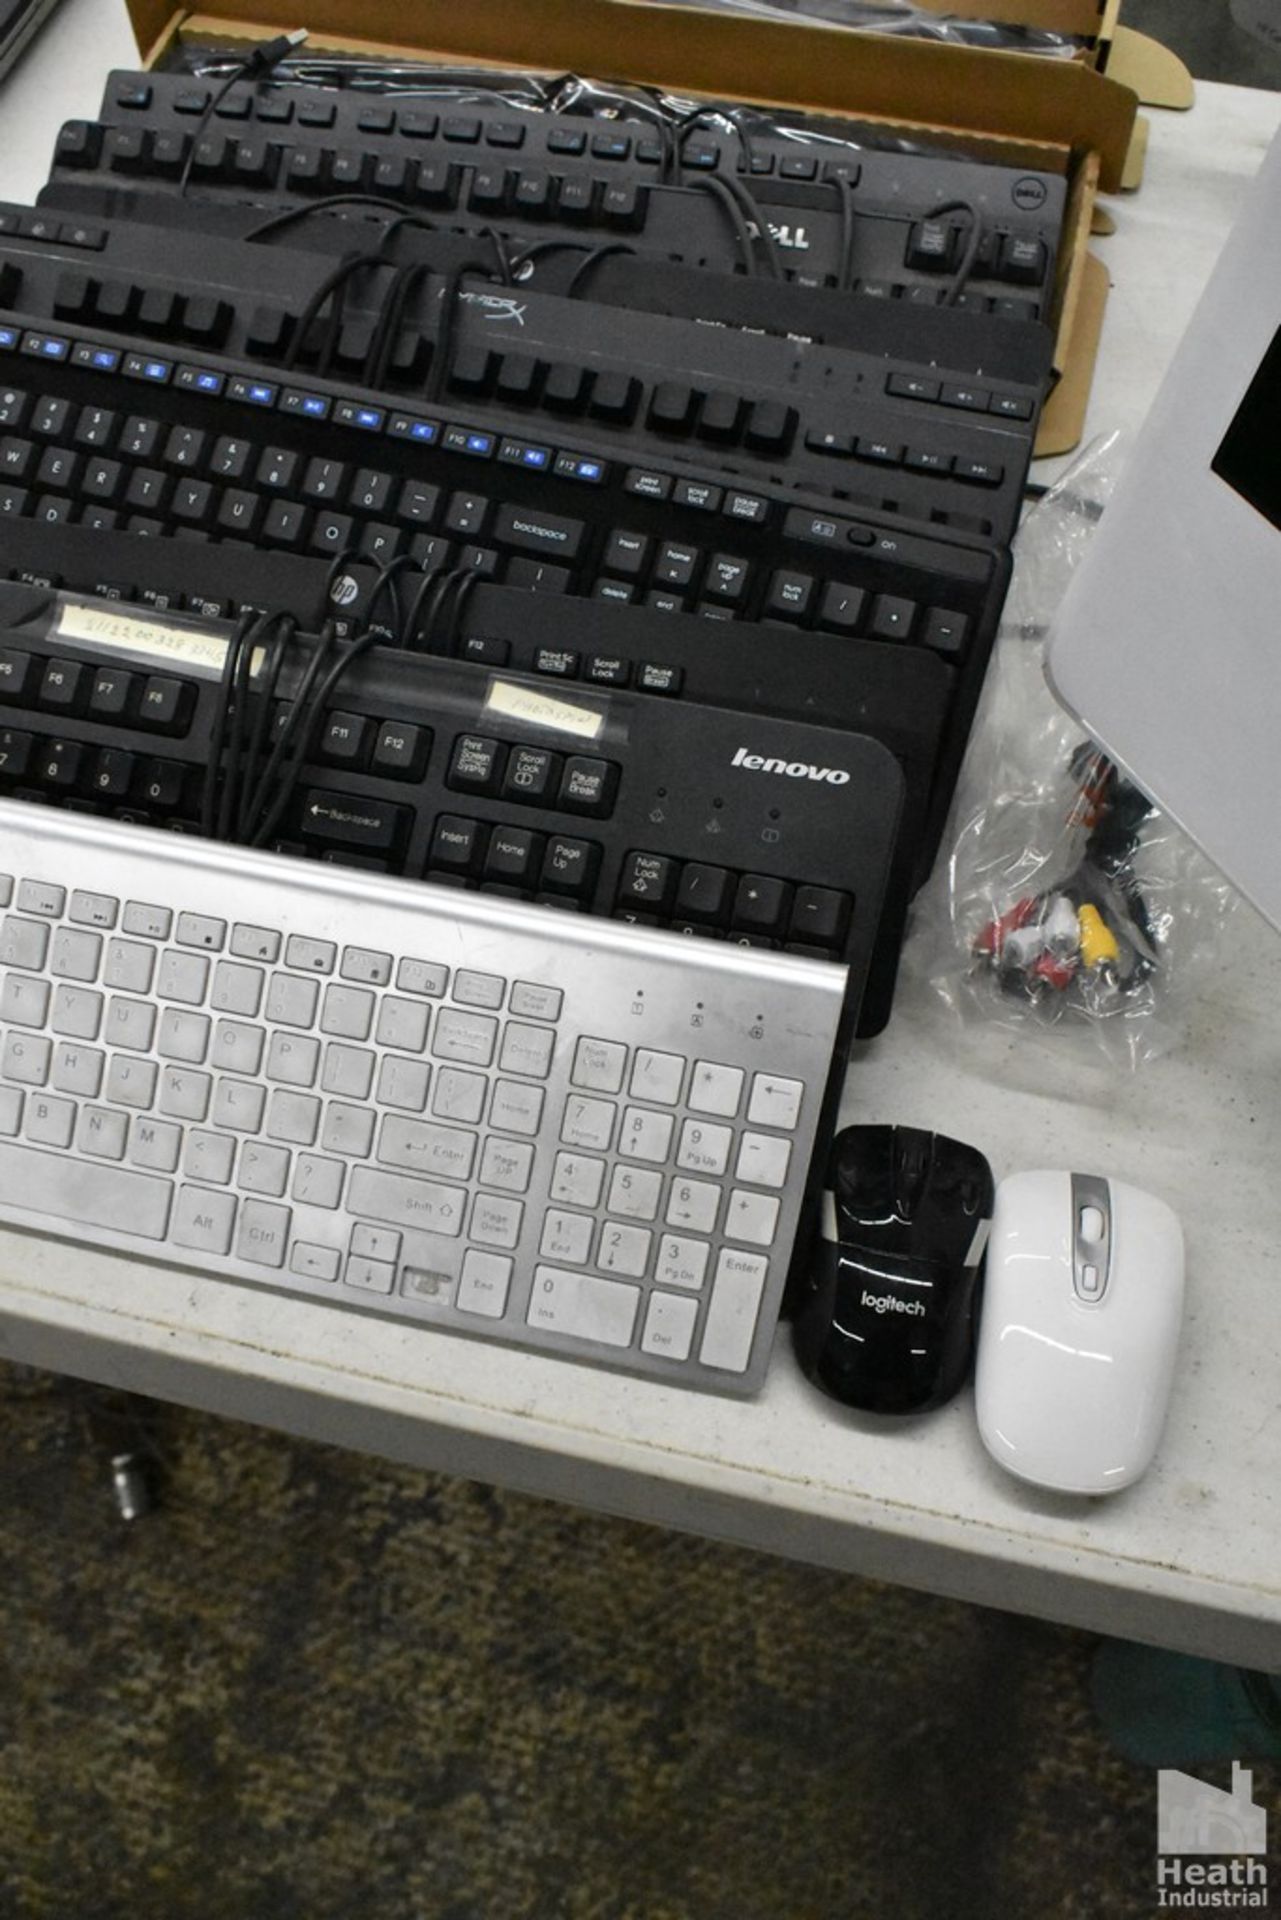 (10) ASSORTED KEYBOARDS AND (2) MICE - Image 3 of 3